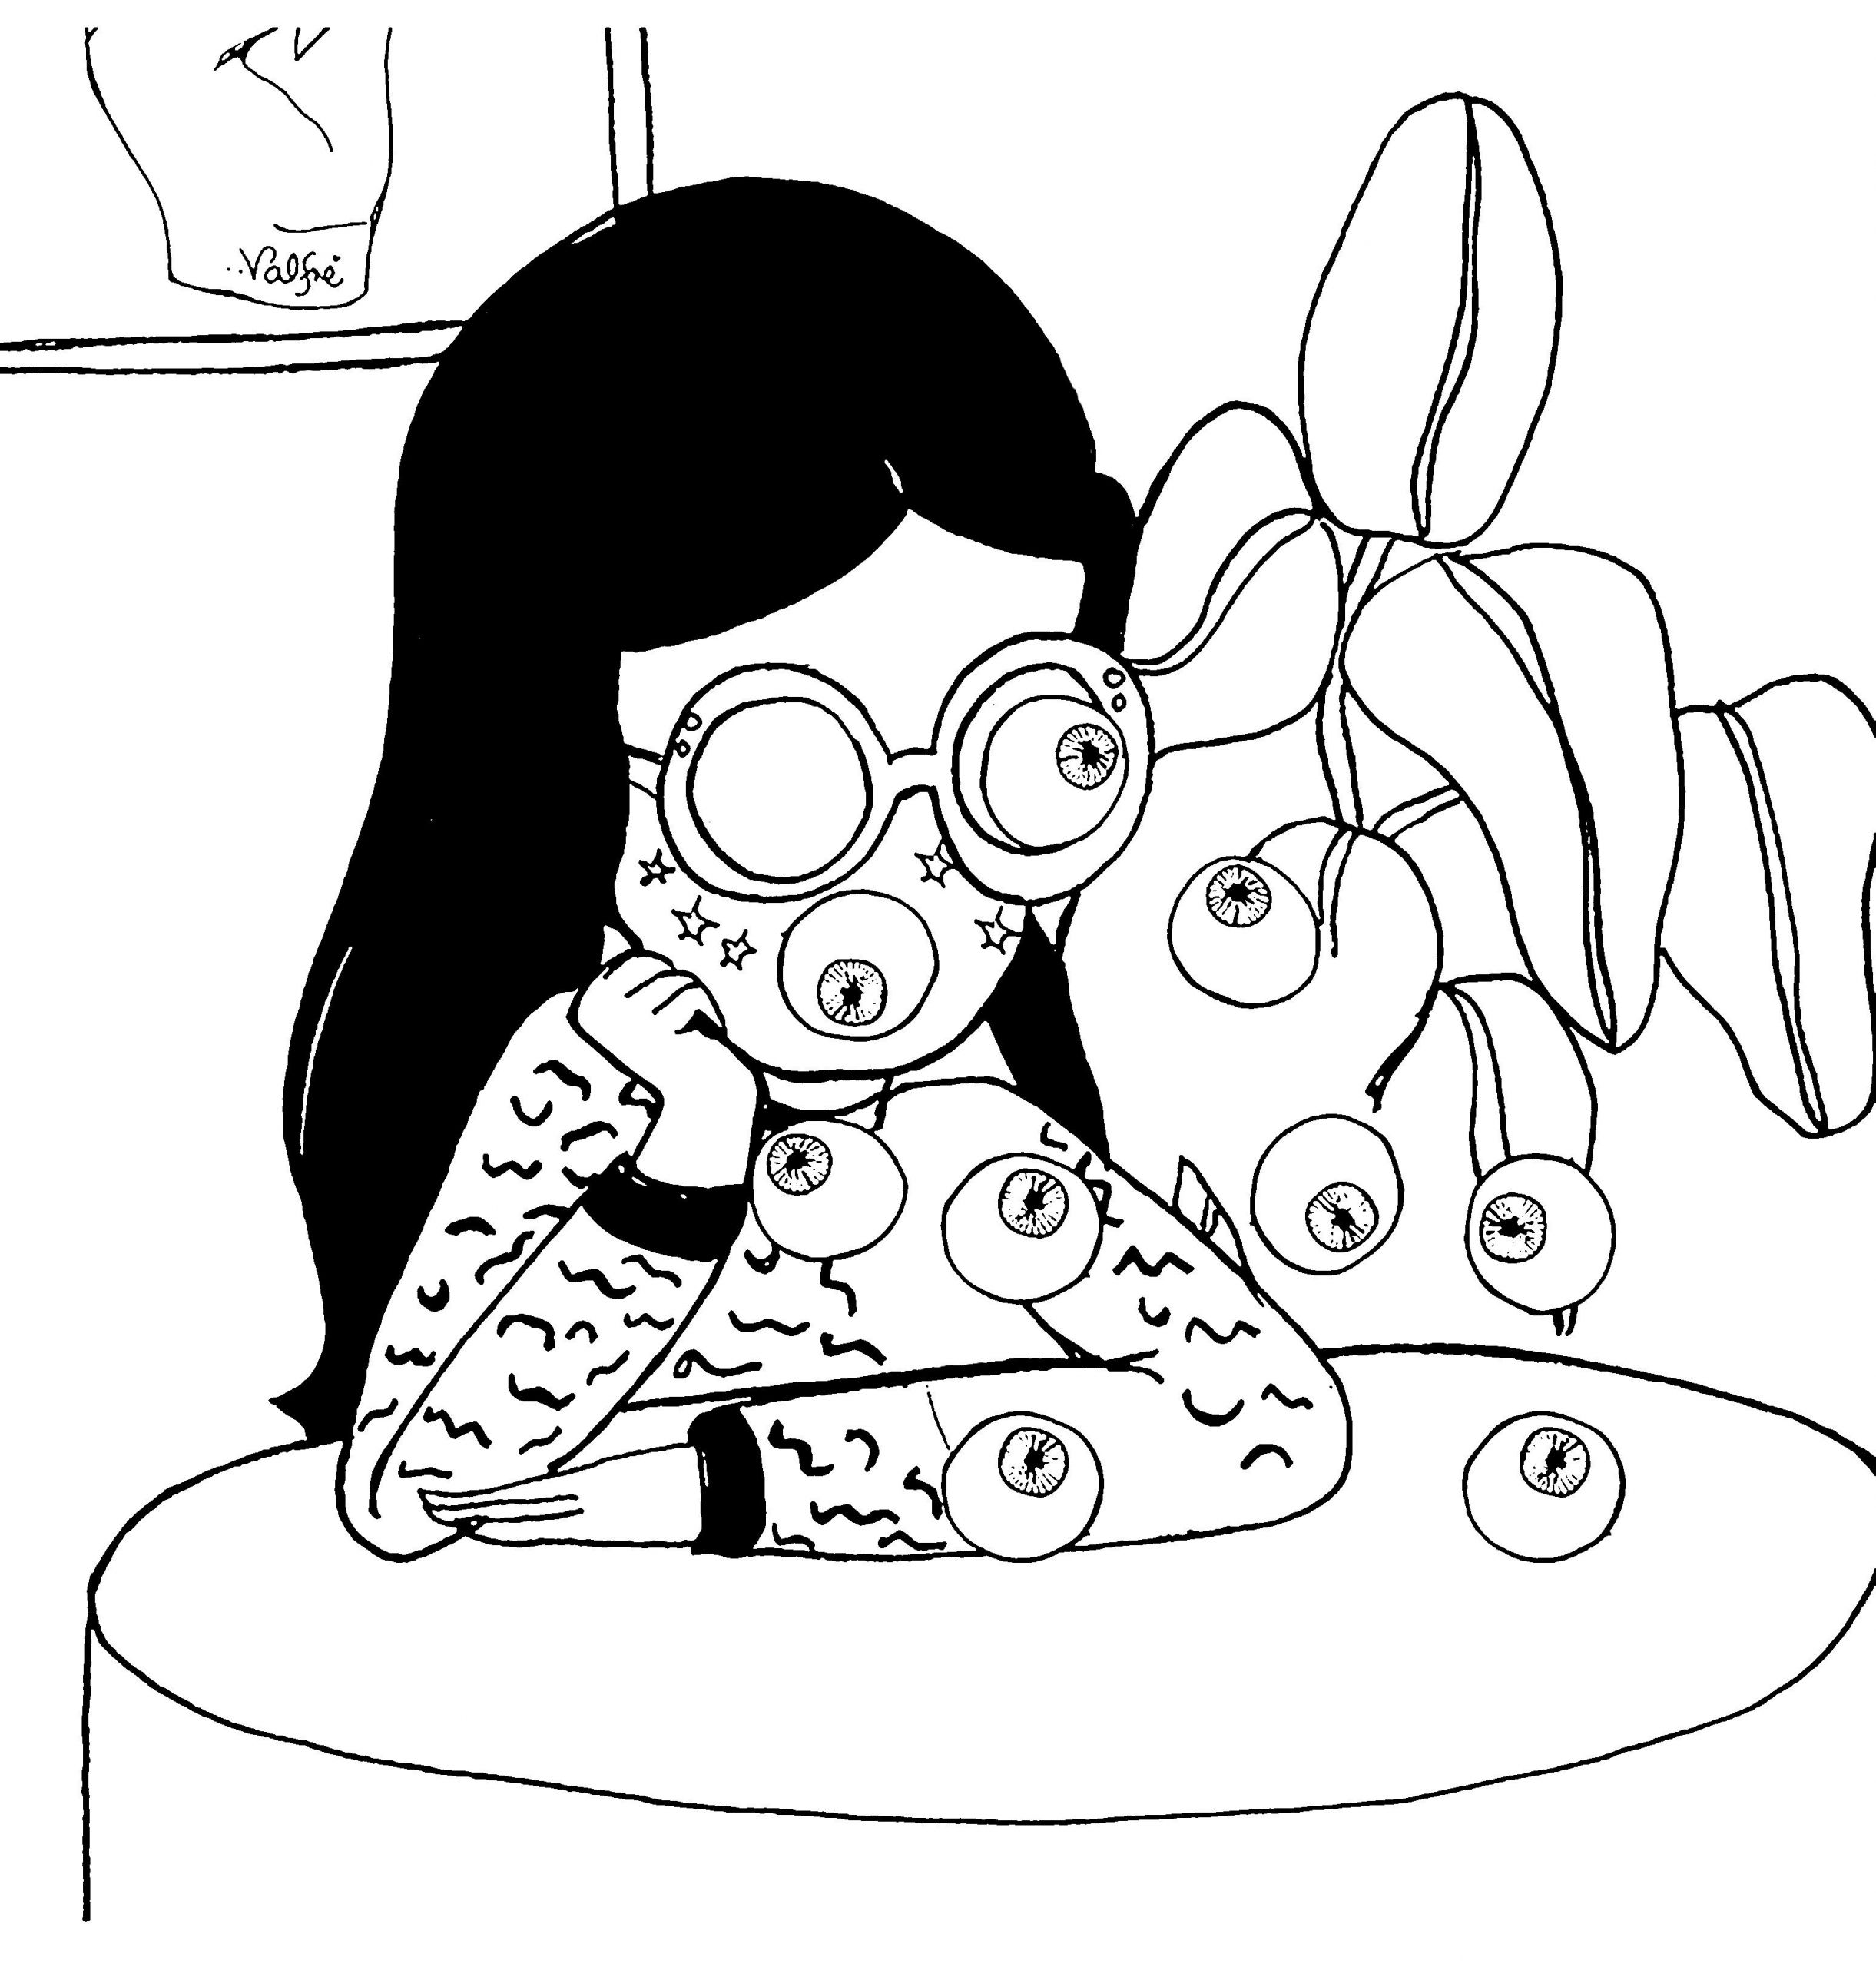 coloring pages : Poop Emoji Coloring Pictures Beautiful Cool Aesthetic  Tumblr Coloring Pages Poop Emoji Coloring Pictures ~  affiliateprogrambook.com